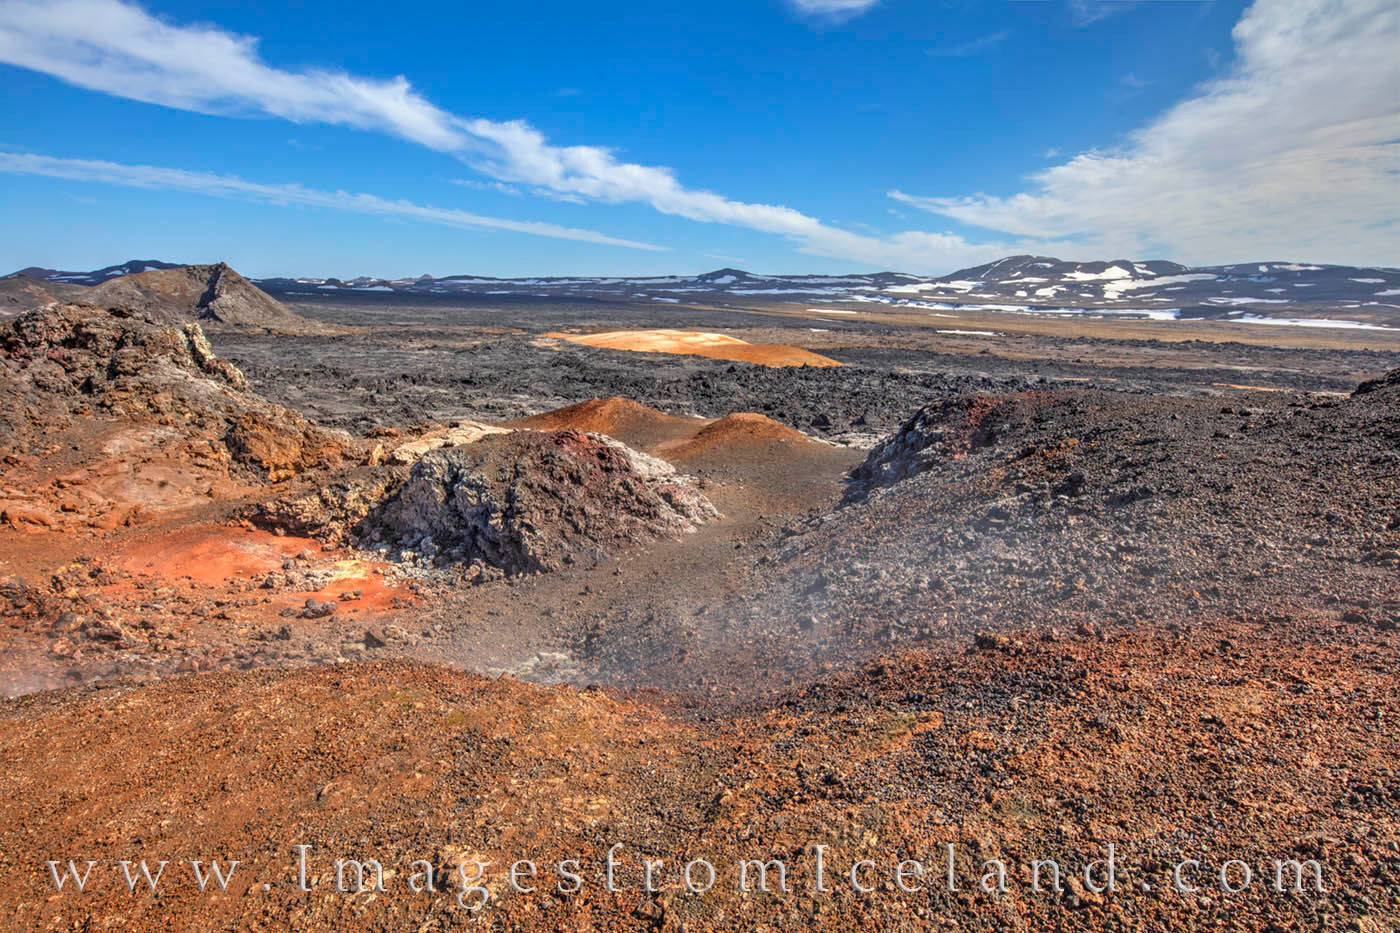 Just a short drive and 15 minute walk, the Leirhnjúkur lava field was formed by volcanic eruptions from 1975-1984. The landscape...